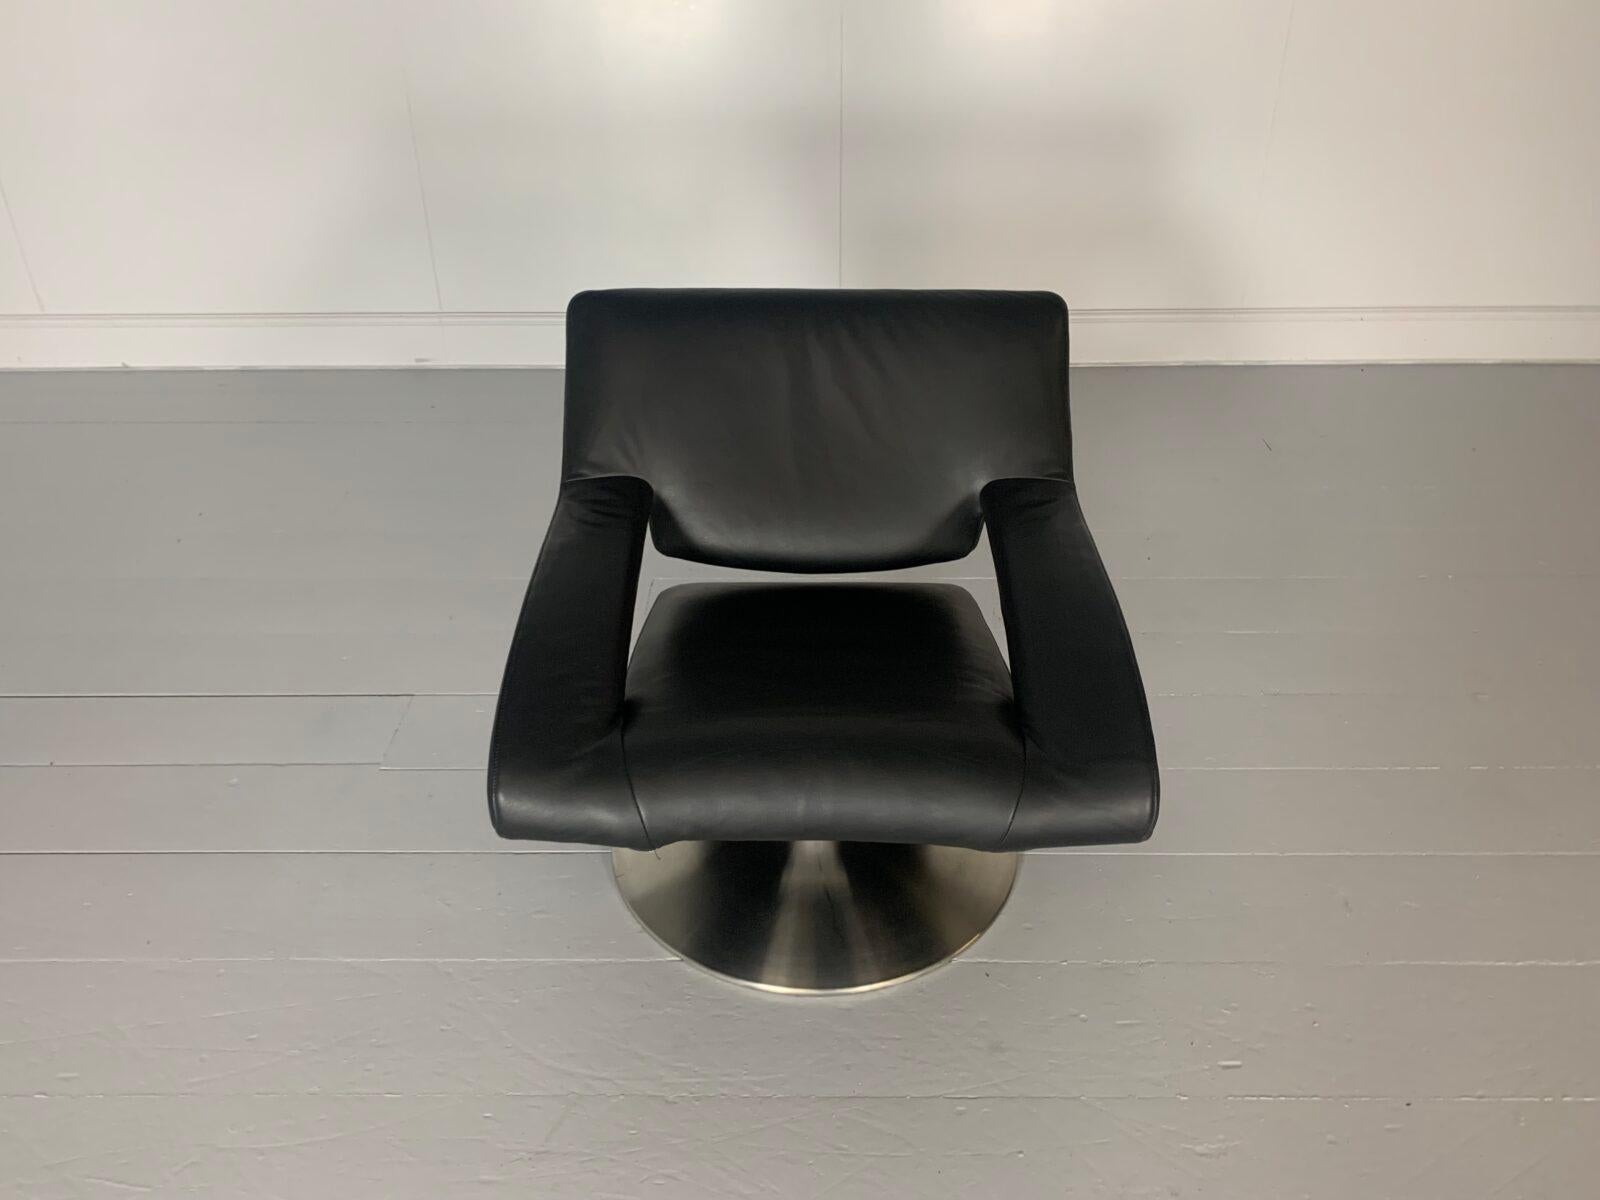 On offer on this occasion is a beautiful, ultra-rare DS255/01 Reclining Armchair from the world renown Swiss furniture house of De Sede.

As you will no doubt be aware by your interest in this modern masterpiece, De Sede pieces are the epitome of